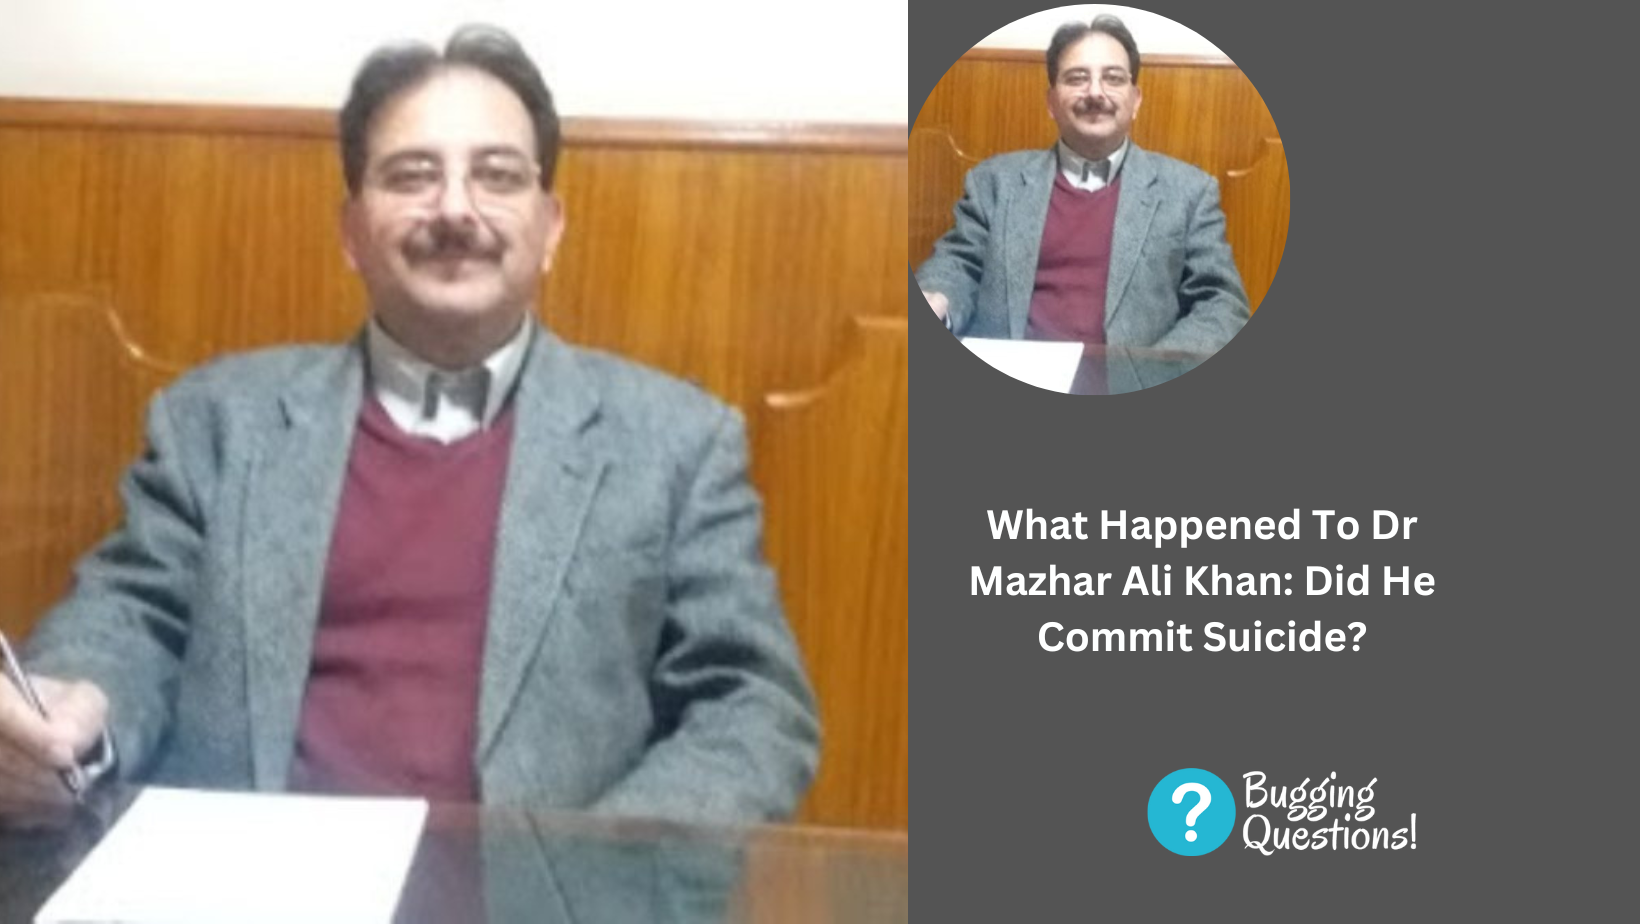 What Happened To Dr Mazhar Ali Khan: Did He Commit Suicide? Here Is What You Should Know